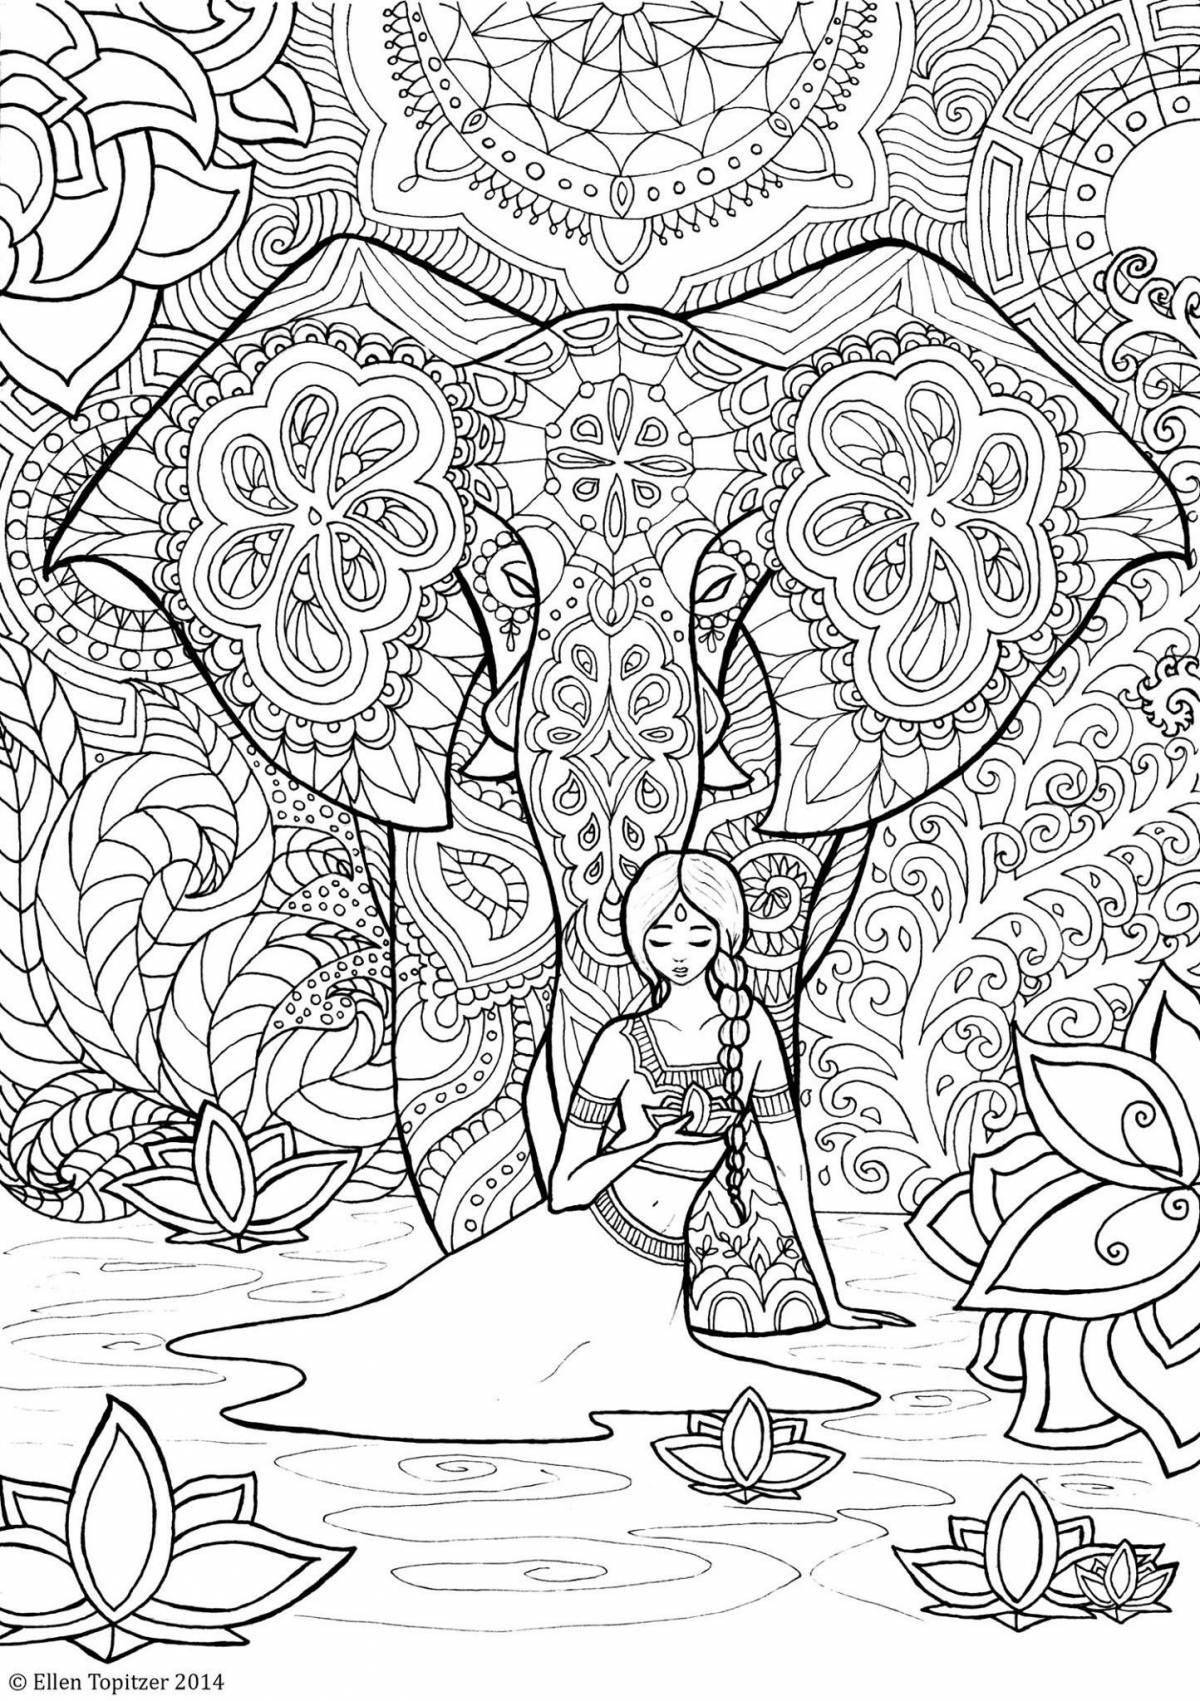 Soothing coloring by numbers for adults en antistress